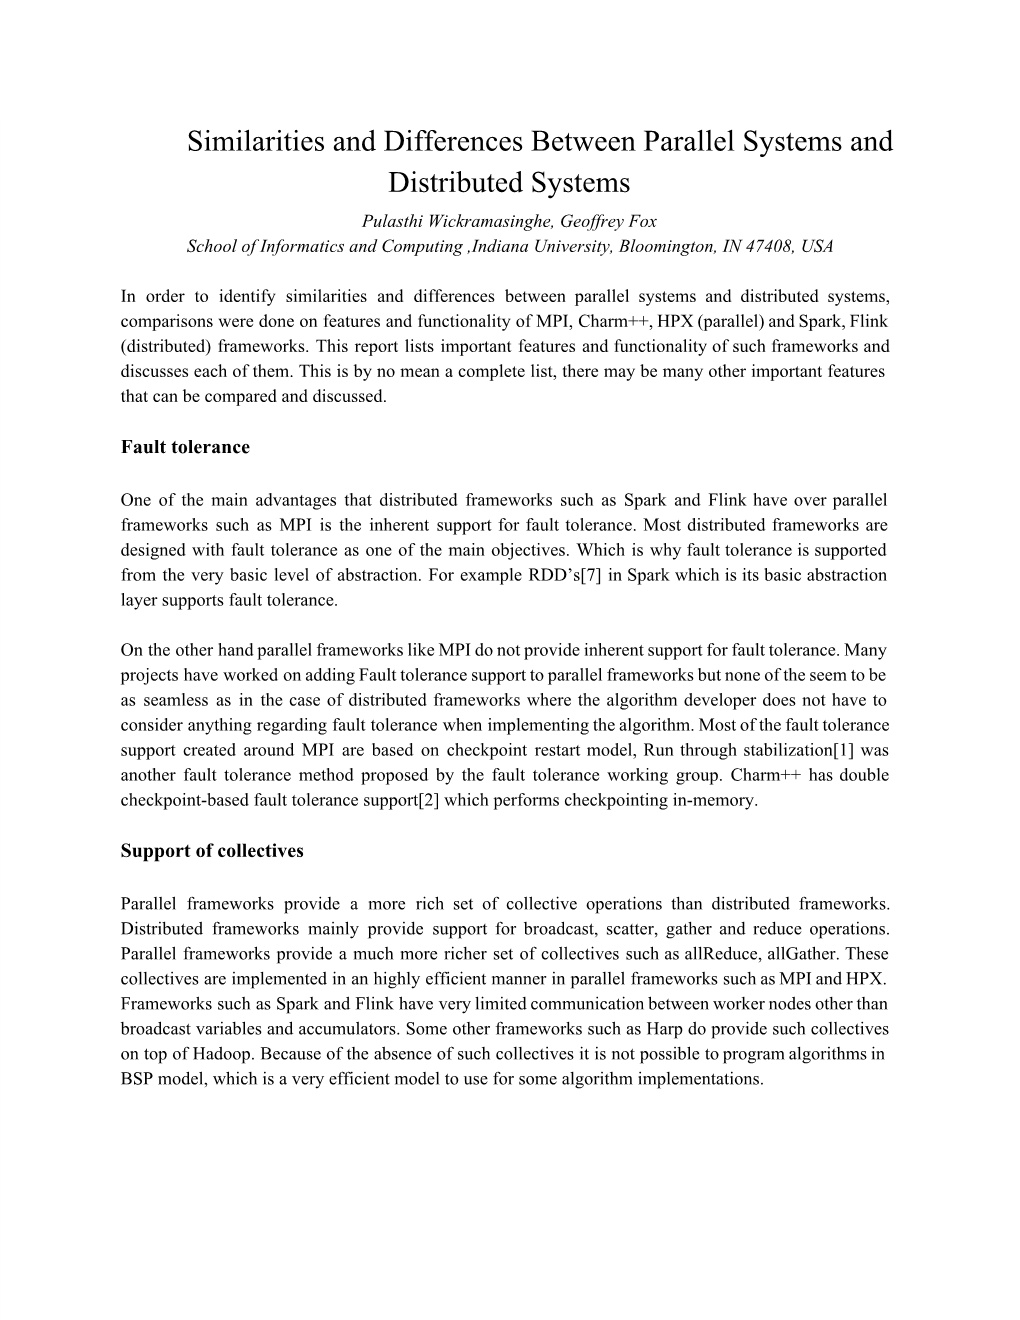 Similarities and Differences Between Parallel Systems and Distributed